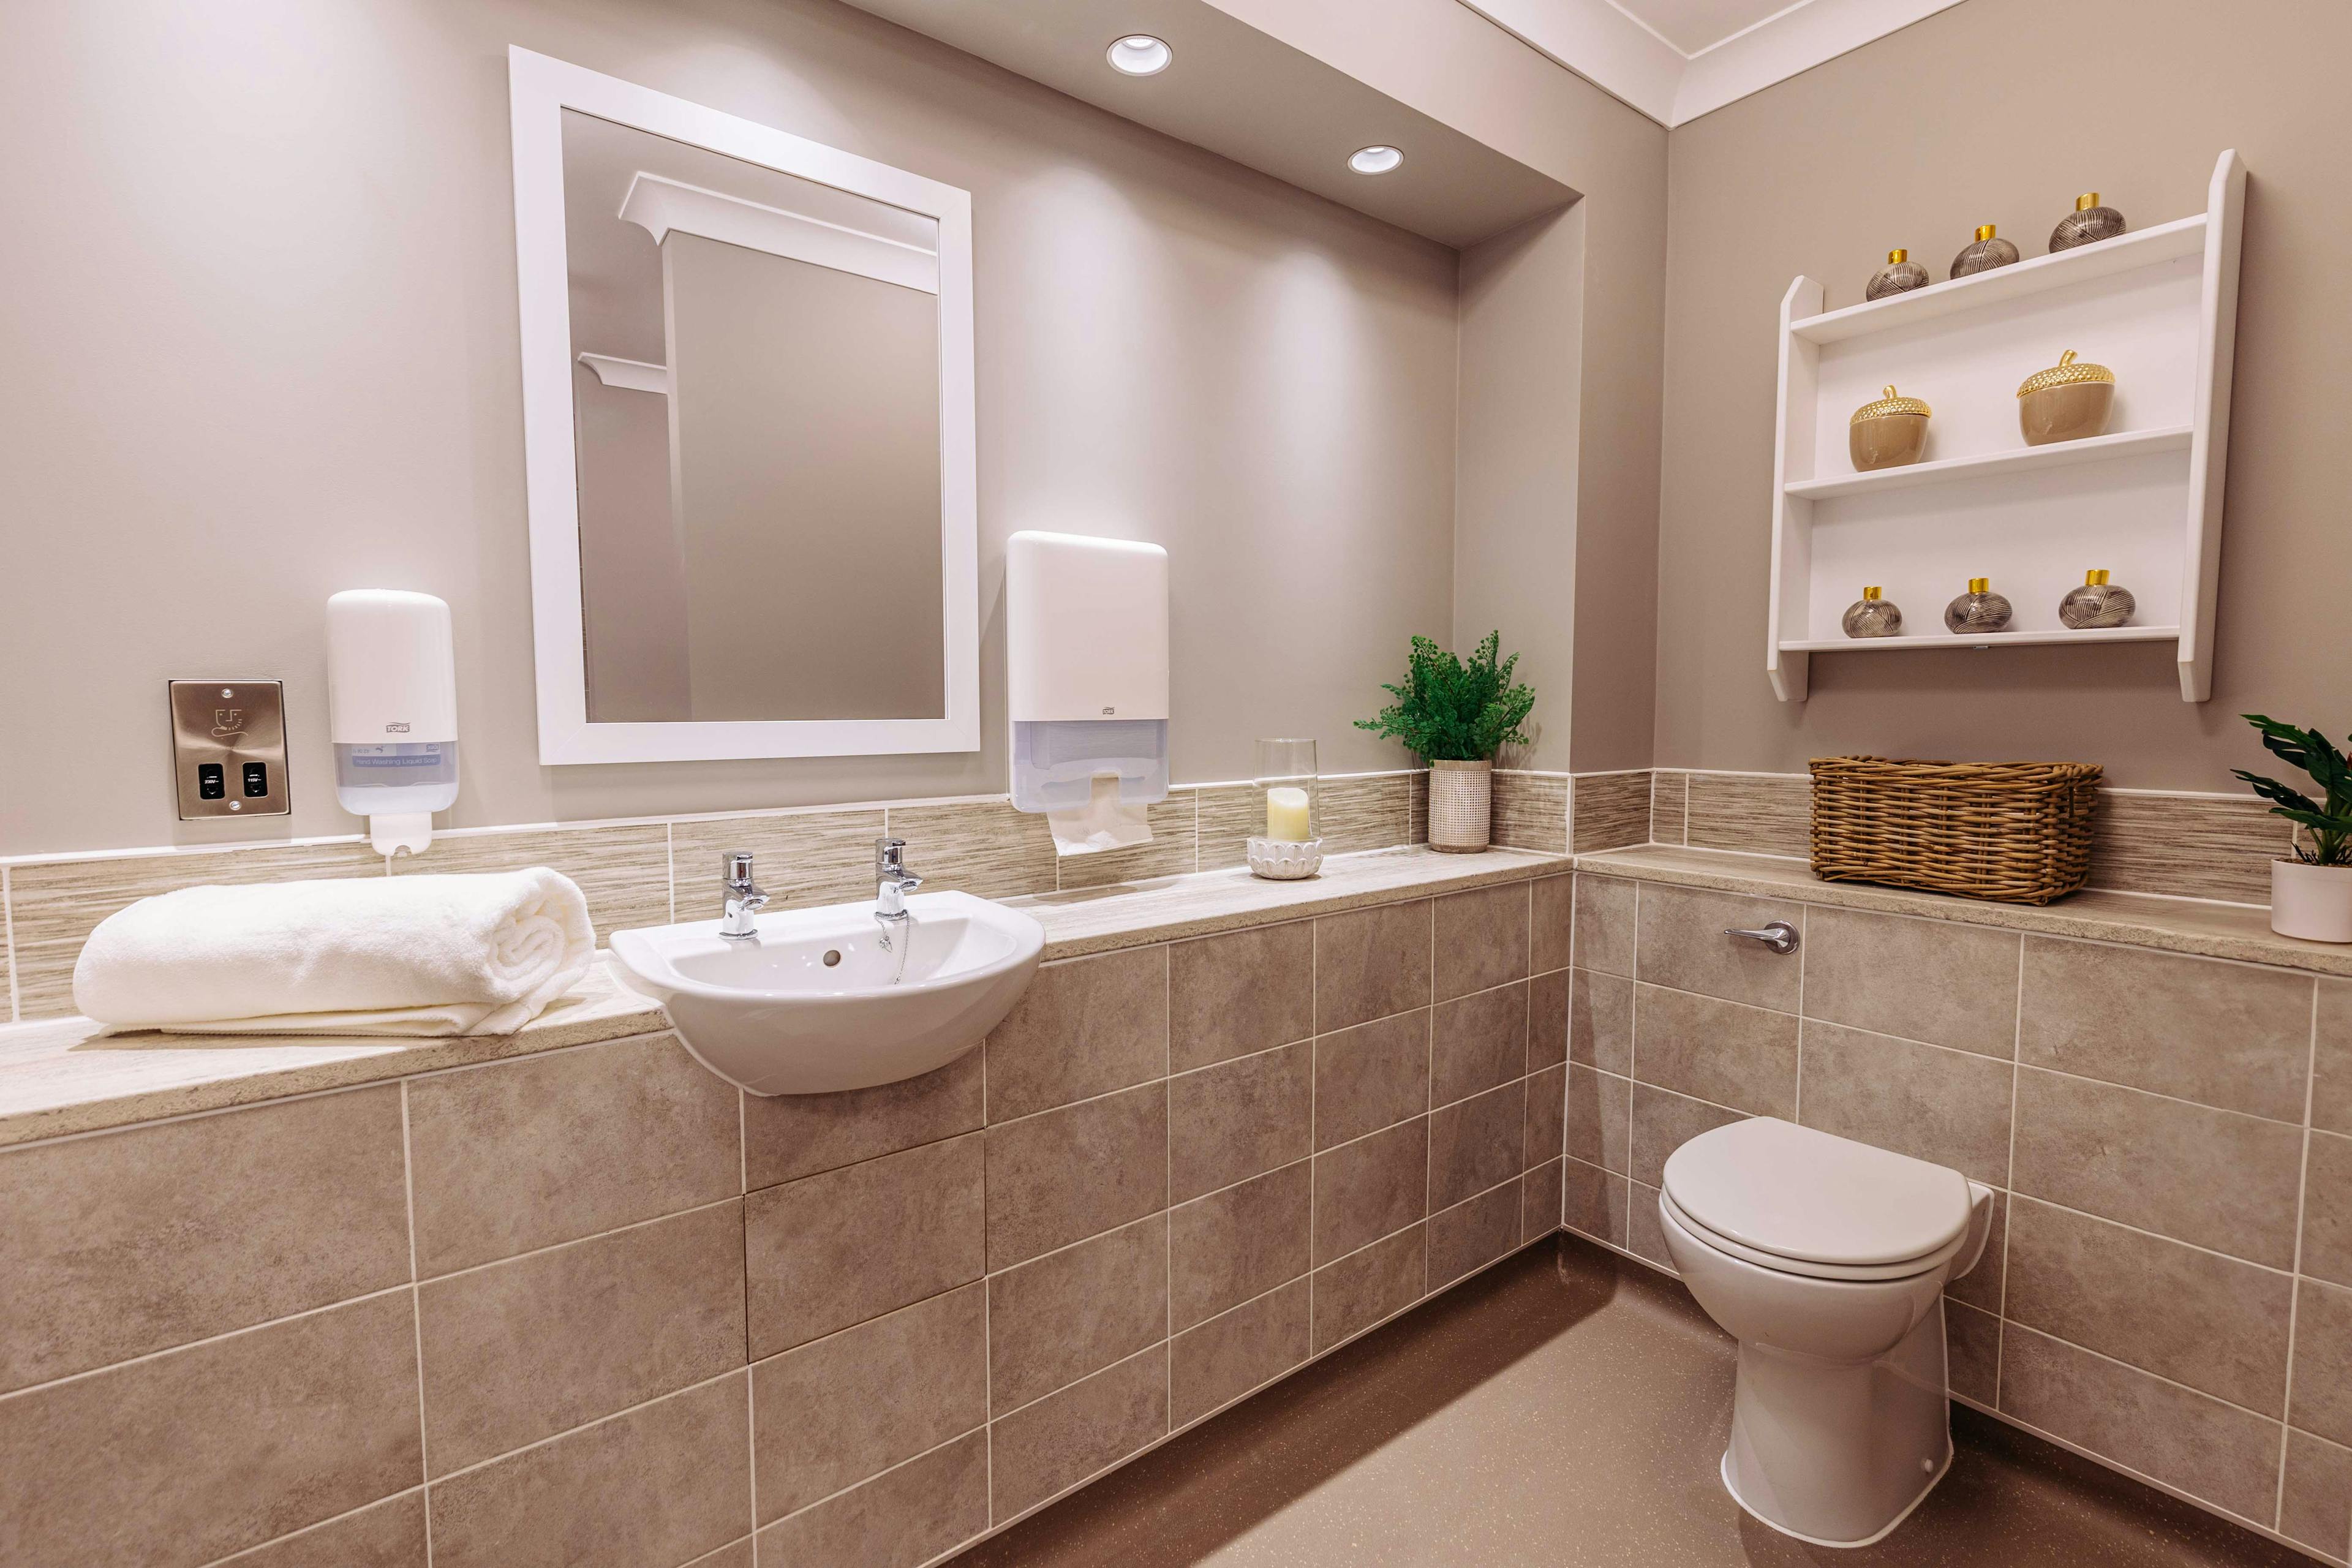 Bathroom at Bere Grove Care Home in Horndean, East Hampshire